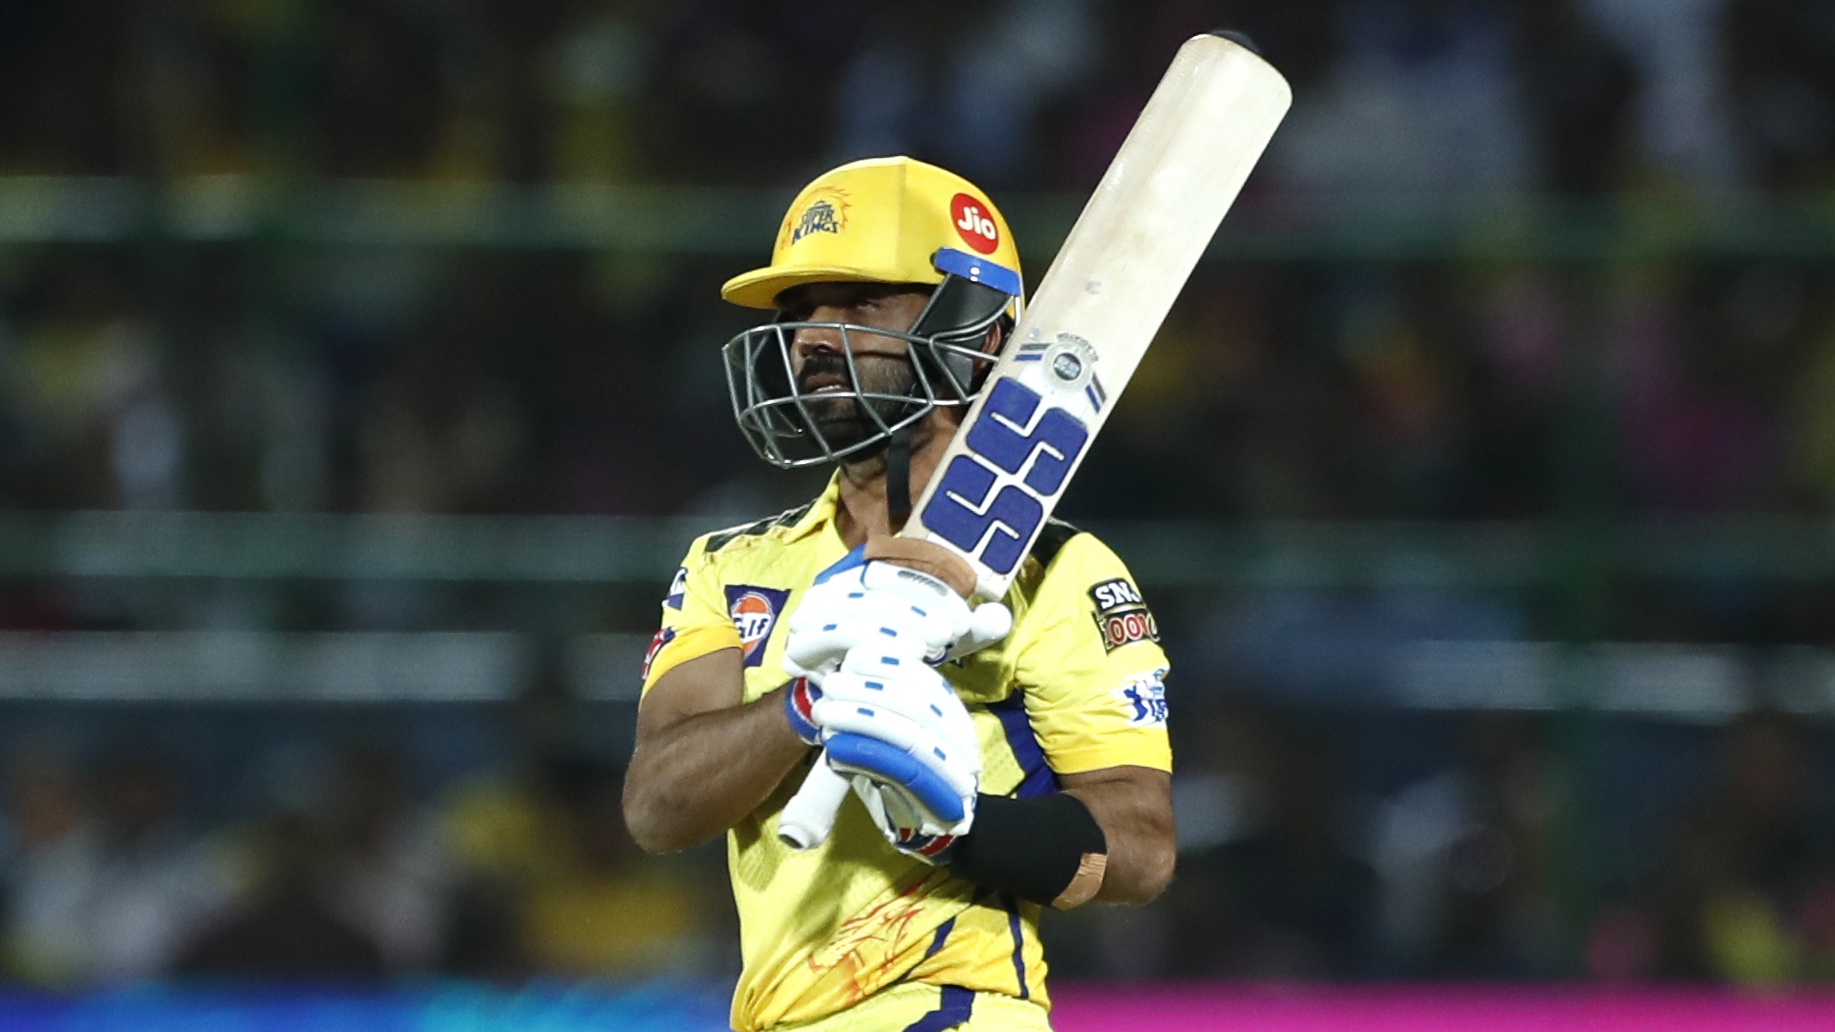 Gujarat Titans vs Chennai Super Kings live stream how to watch the IPL playoff match free online today TechRadar